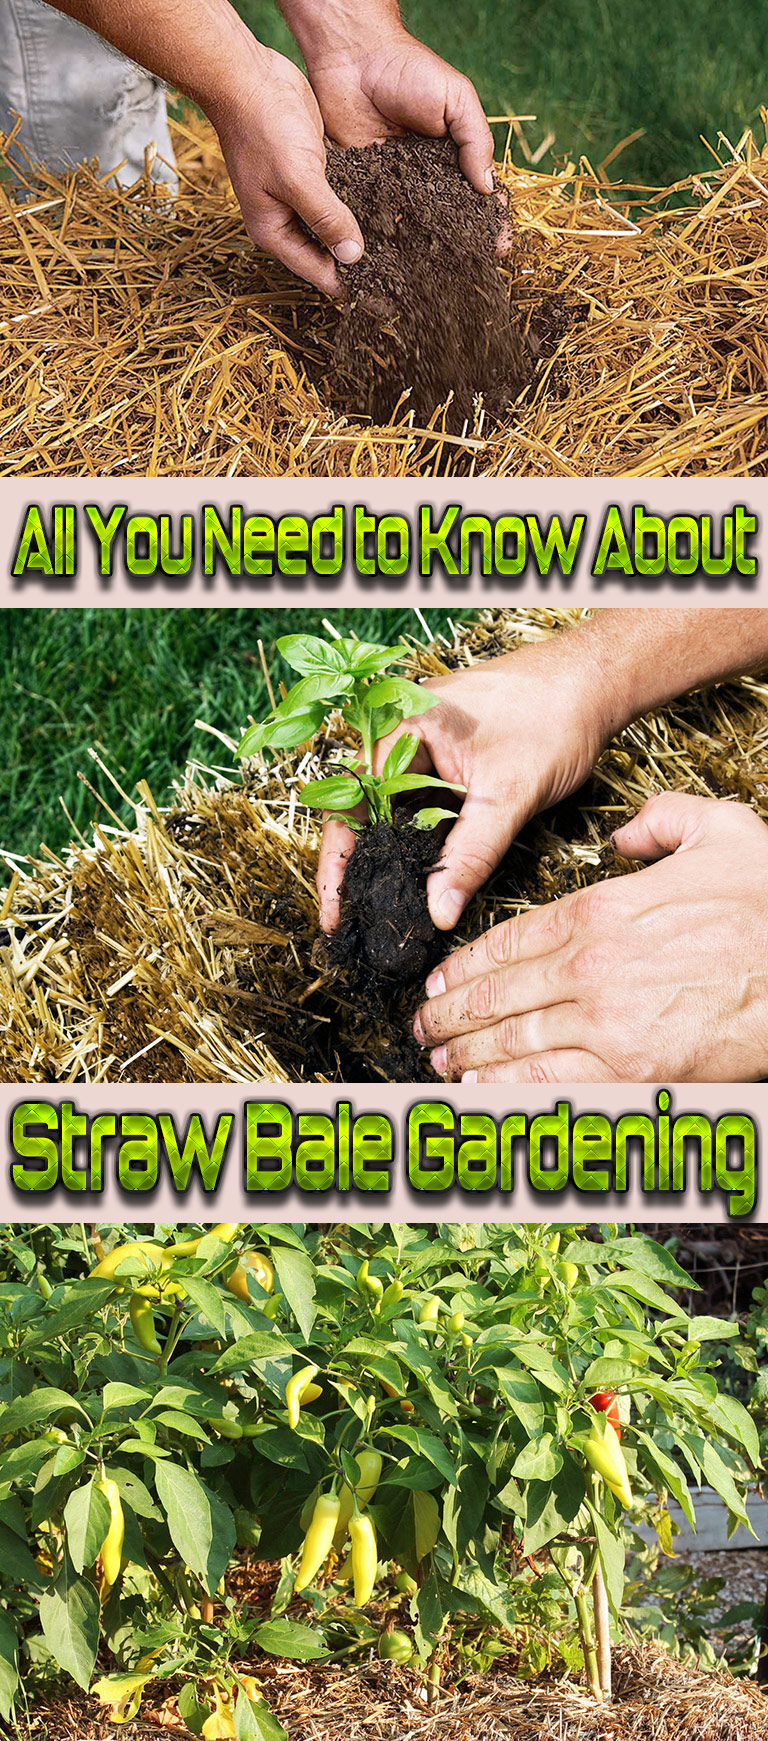 All You Need to Know About Straw Bale Gardening